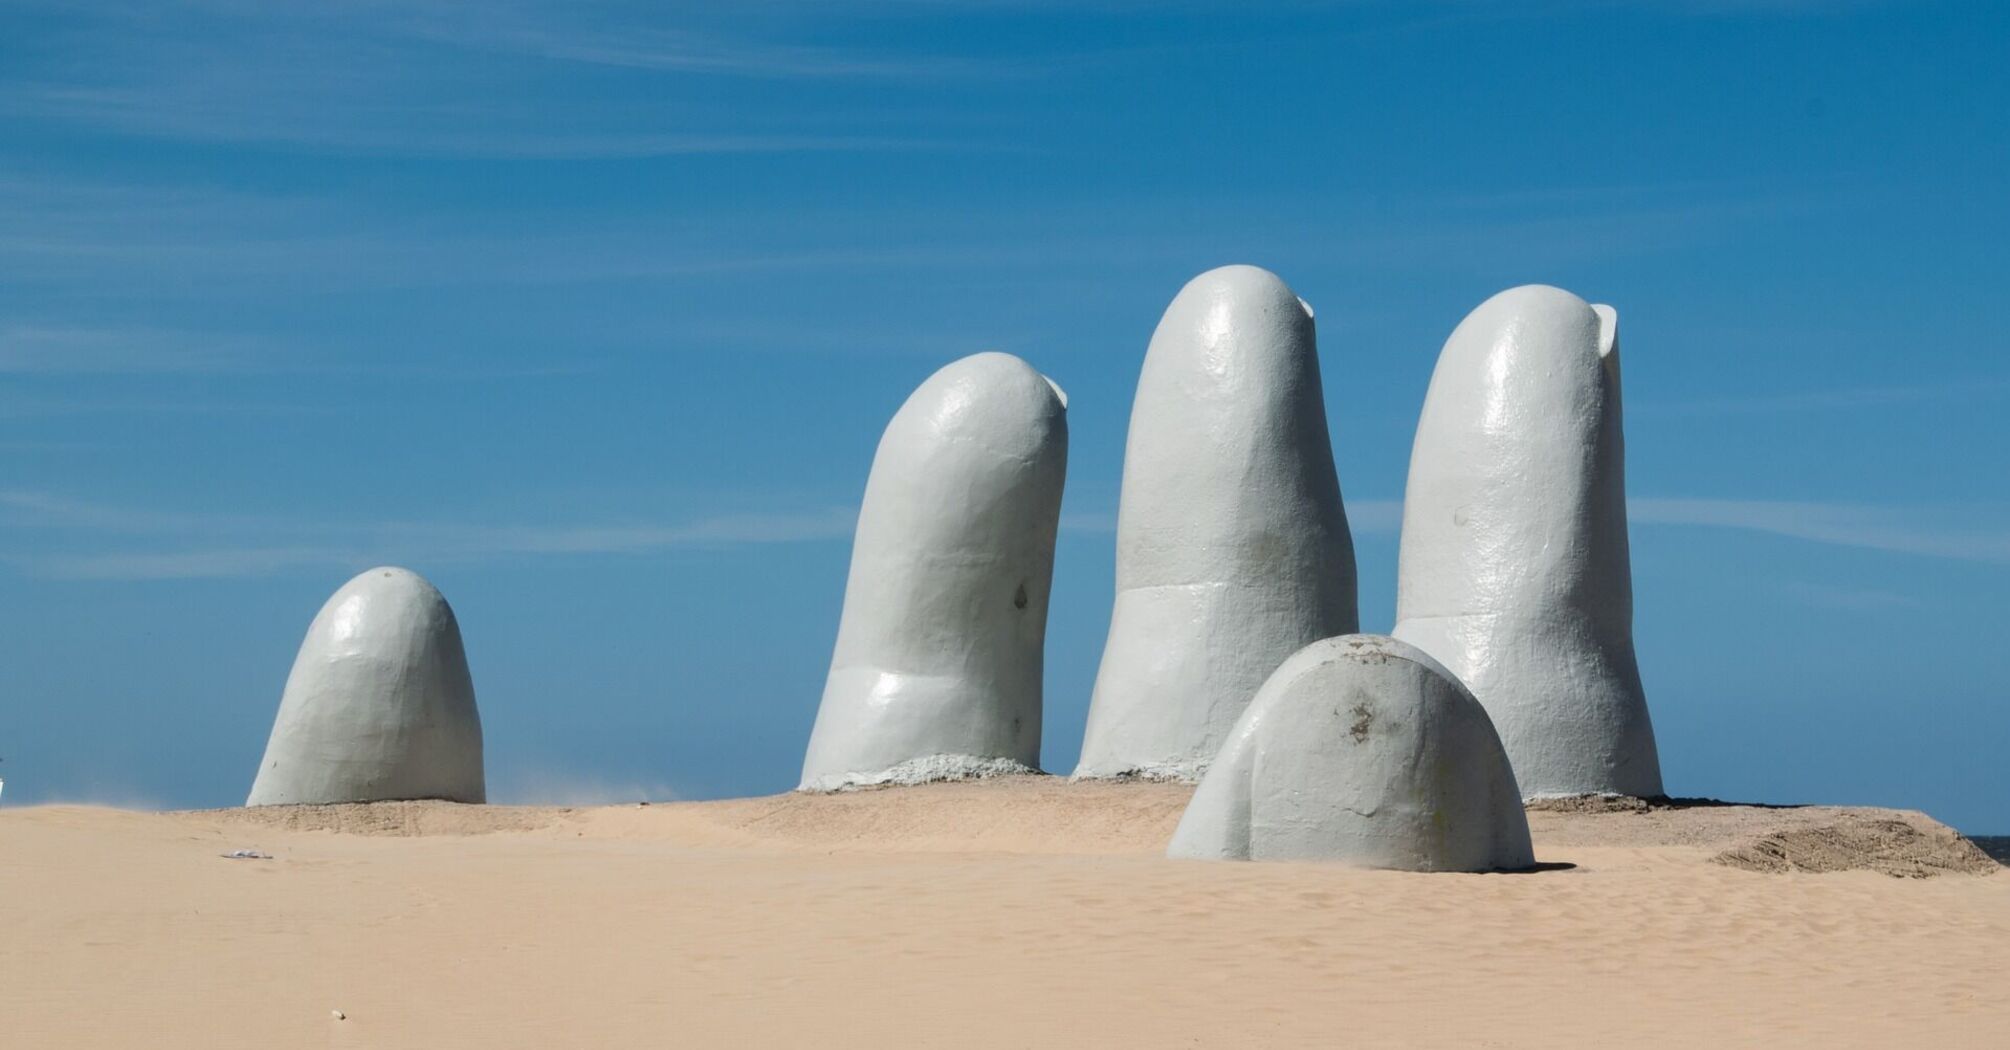 A large sculpture of a hand partially buried in sand on a beach under a clear blue sky 